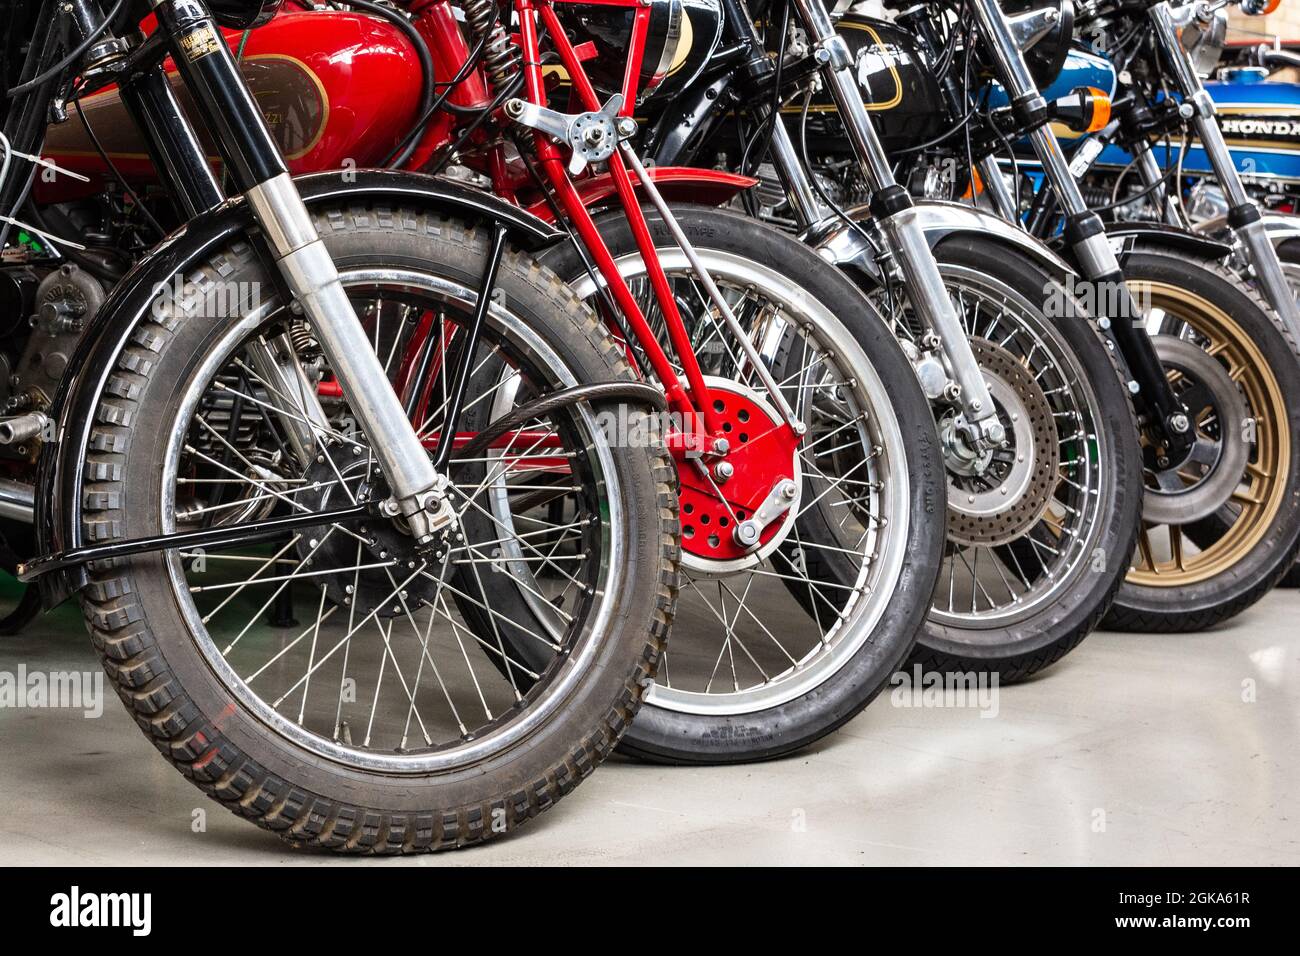 Various old motorcycles in a row Stock Photo